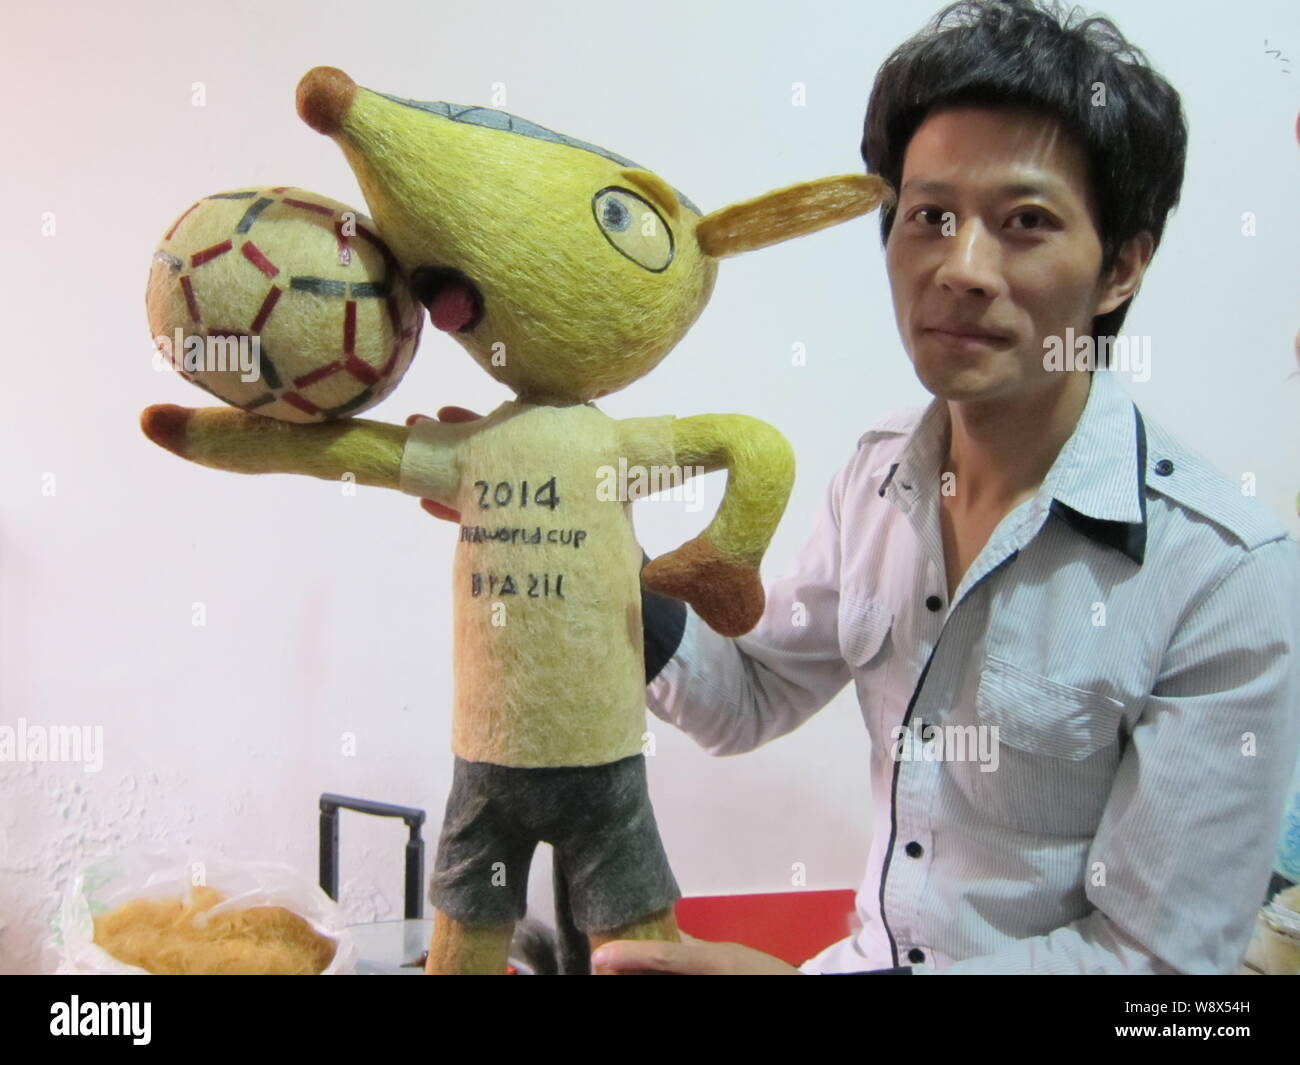 Chinese hairstylist Huang Xin poses with his hair-made Fuleco, the mascot of the 2014 FIFA World Cup Brazil, in Beijing, China, 8 May 2014.   A Chines Stock Photo